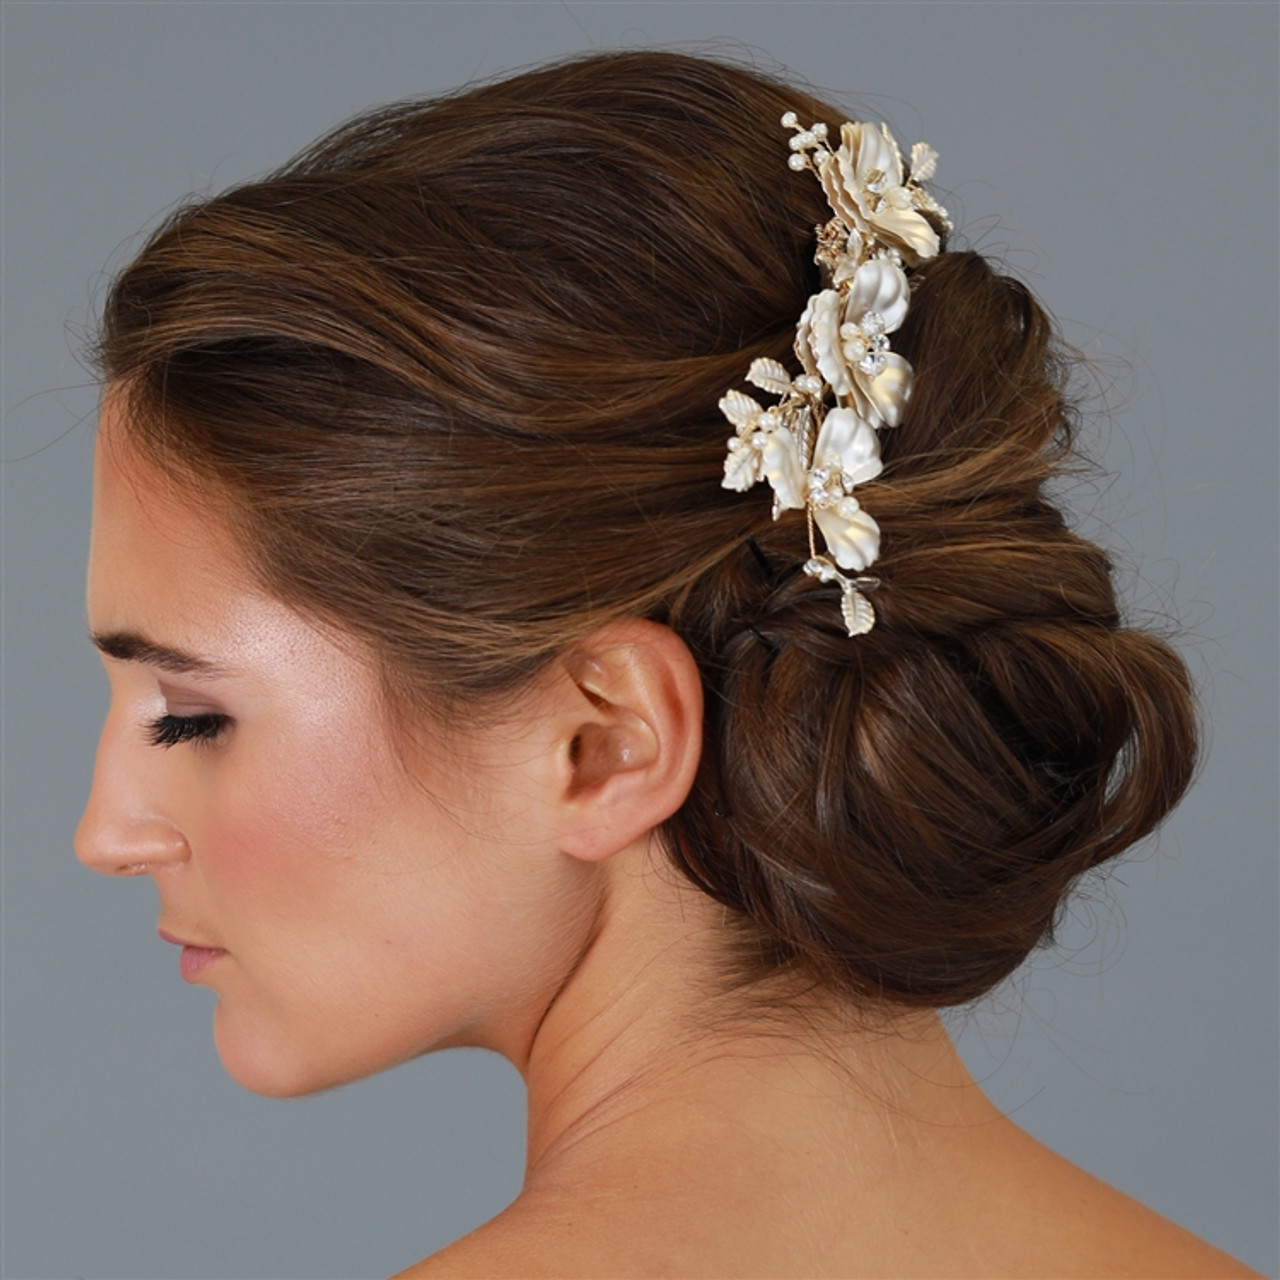 Mariell Bridal Opulent Multi Layer Matte Gold Floral Wedding Comb with Ivory Pearls and Crystal Accents 4643HC-G